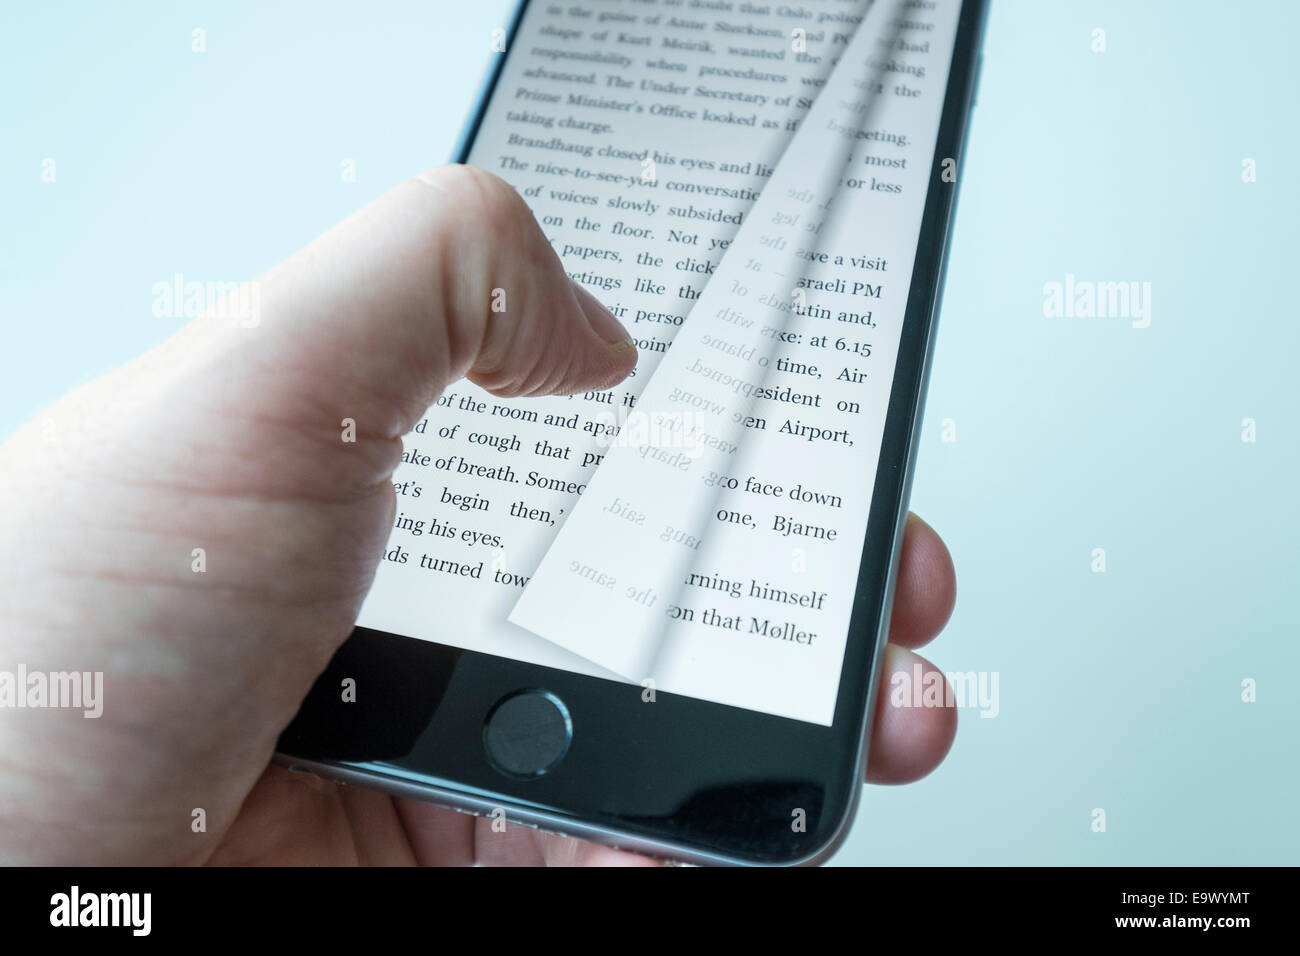 Reading an e-book on an iPhone 6 Plus smart phone Stock Photo